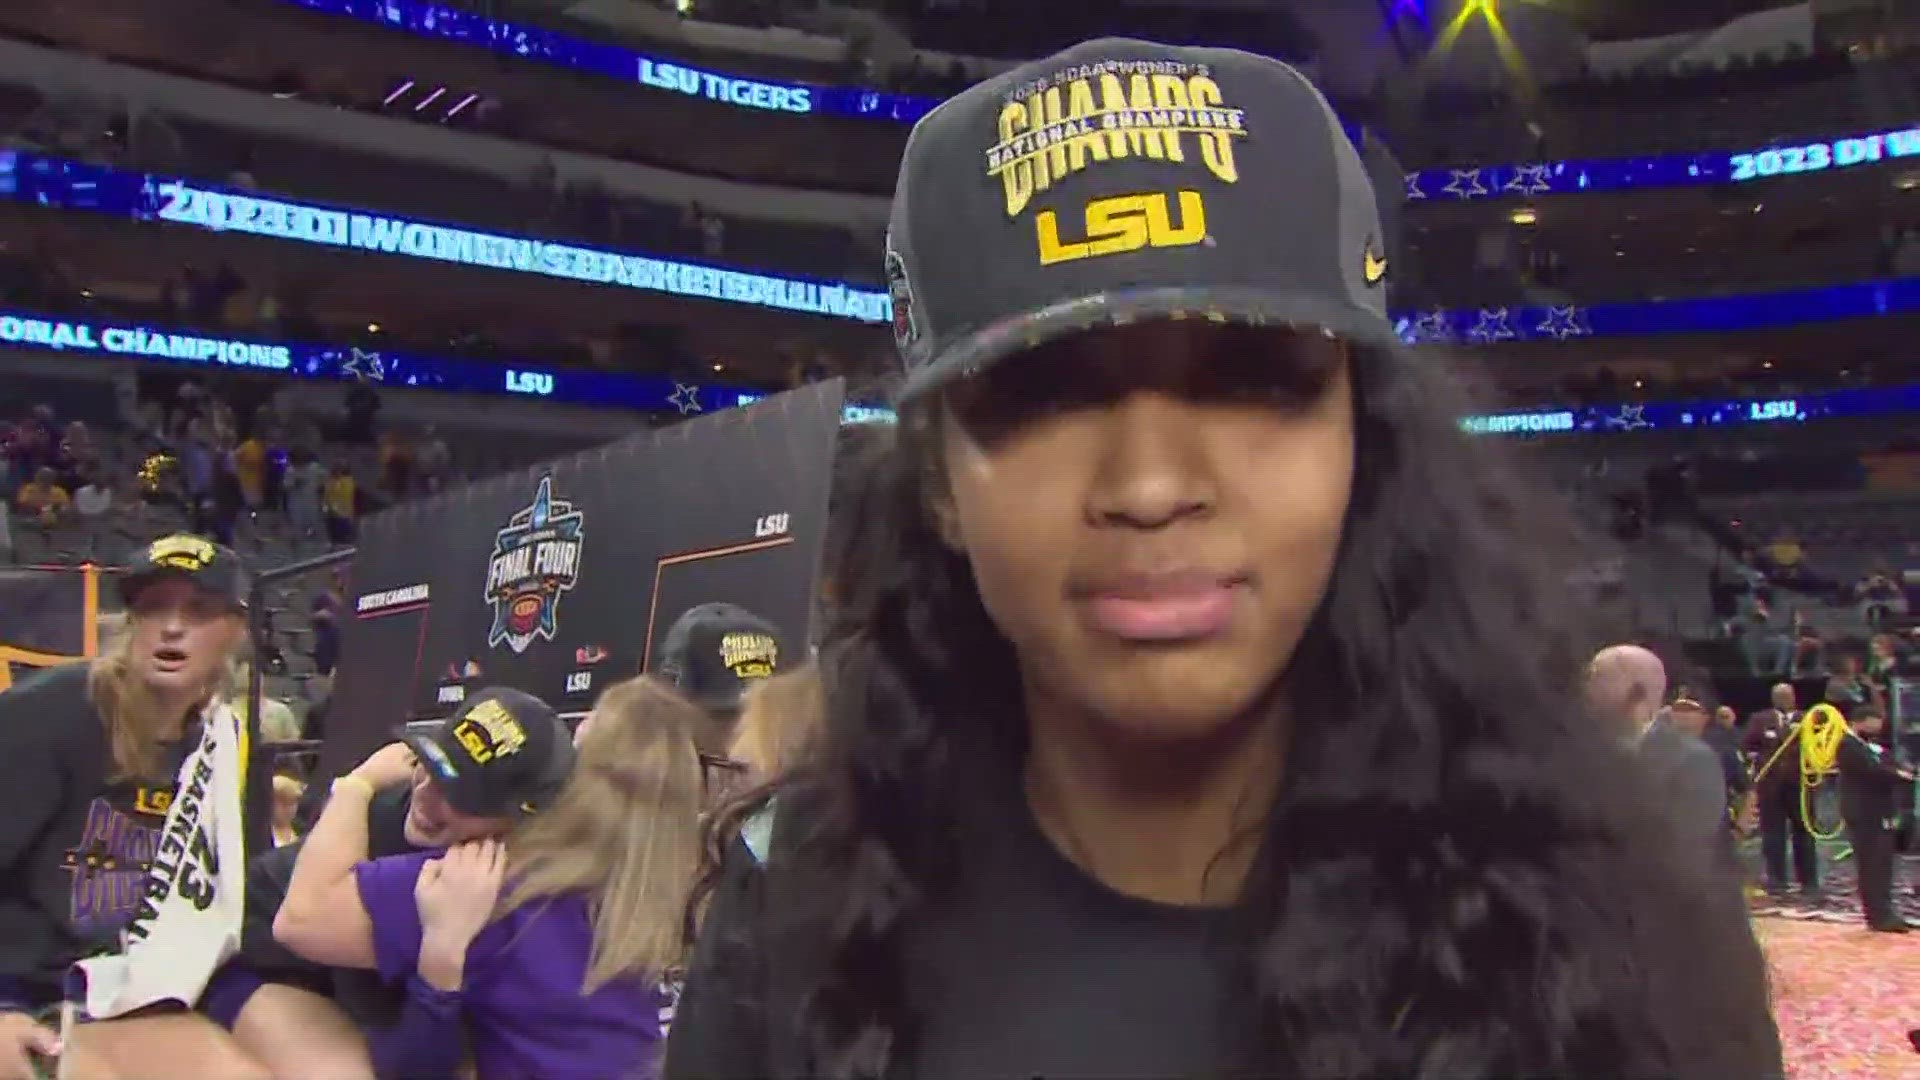 LSU's Angel Reese had some things to say after the win over Iowa for the national title.